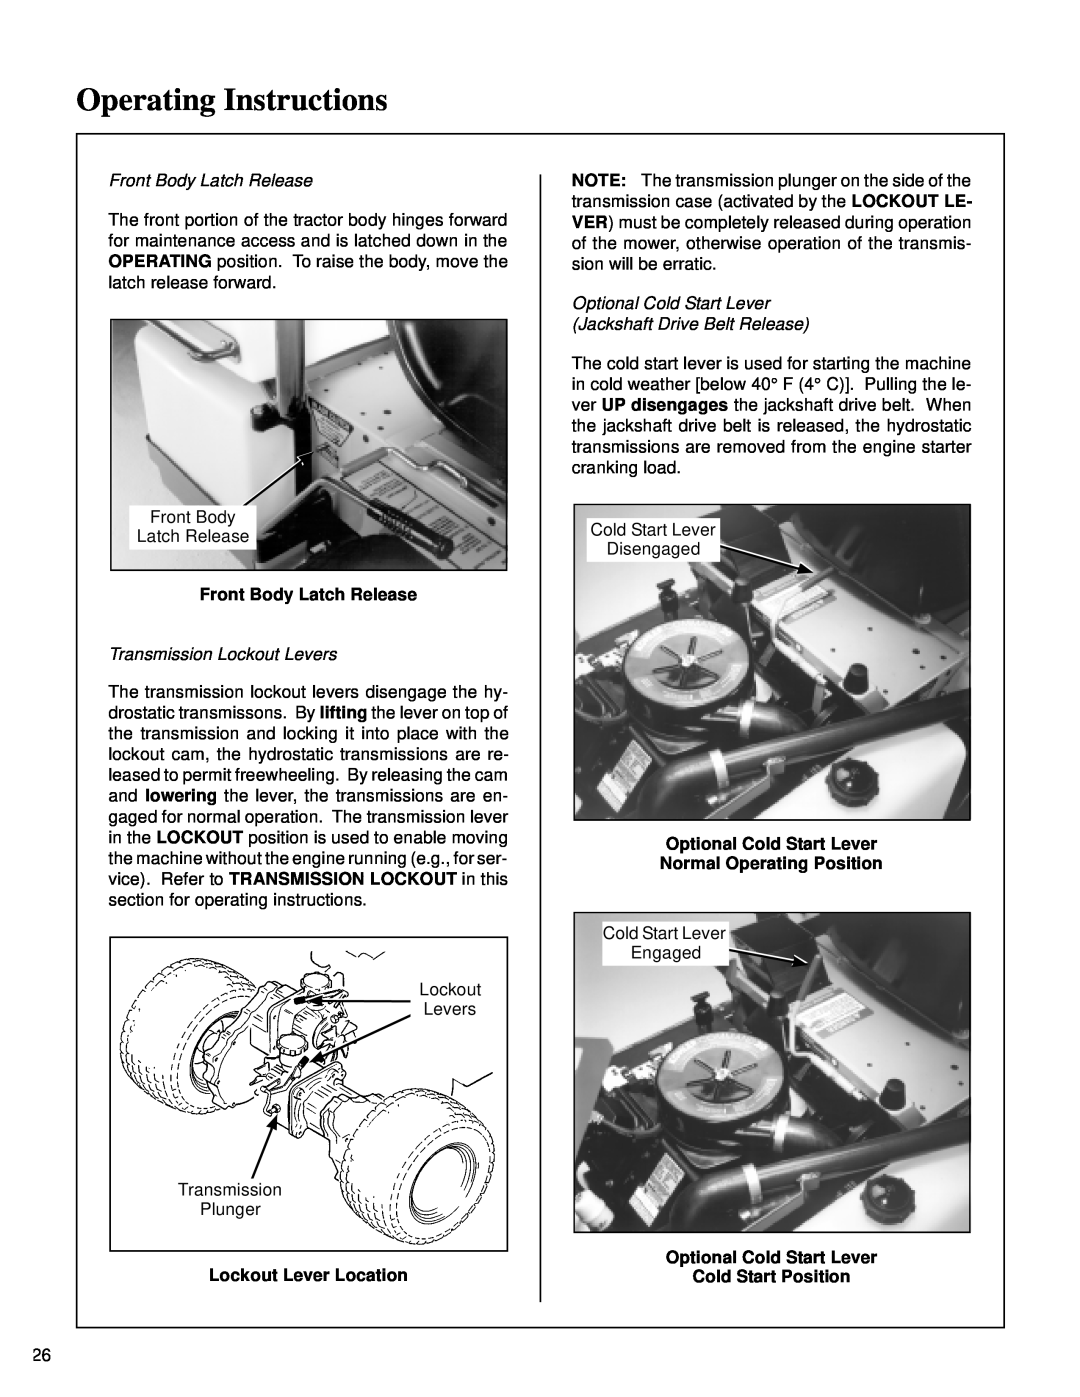 Walker MT Operating Instructions, Front Body Latch Release, Transmission Lockout Levers, Lockout Lever Location 